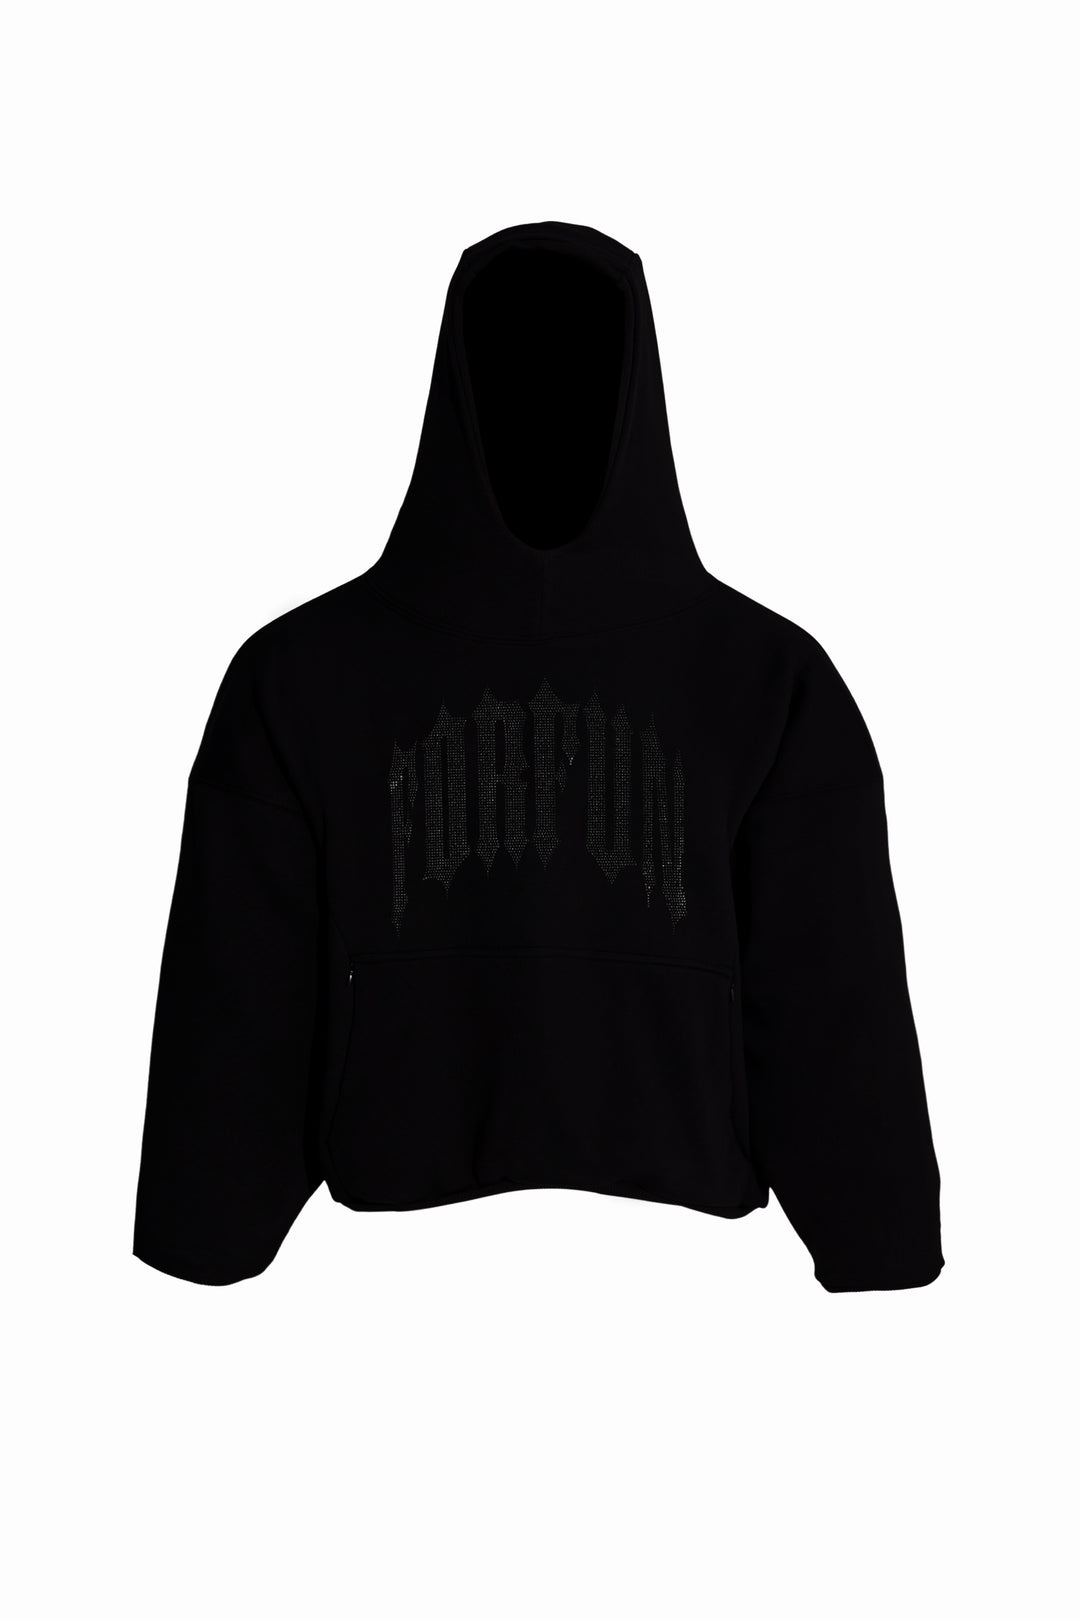 For Fun / Oversized Double Layer Rhinestone Pullover Hoodie